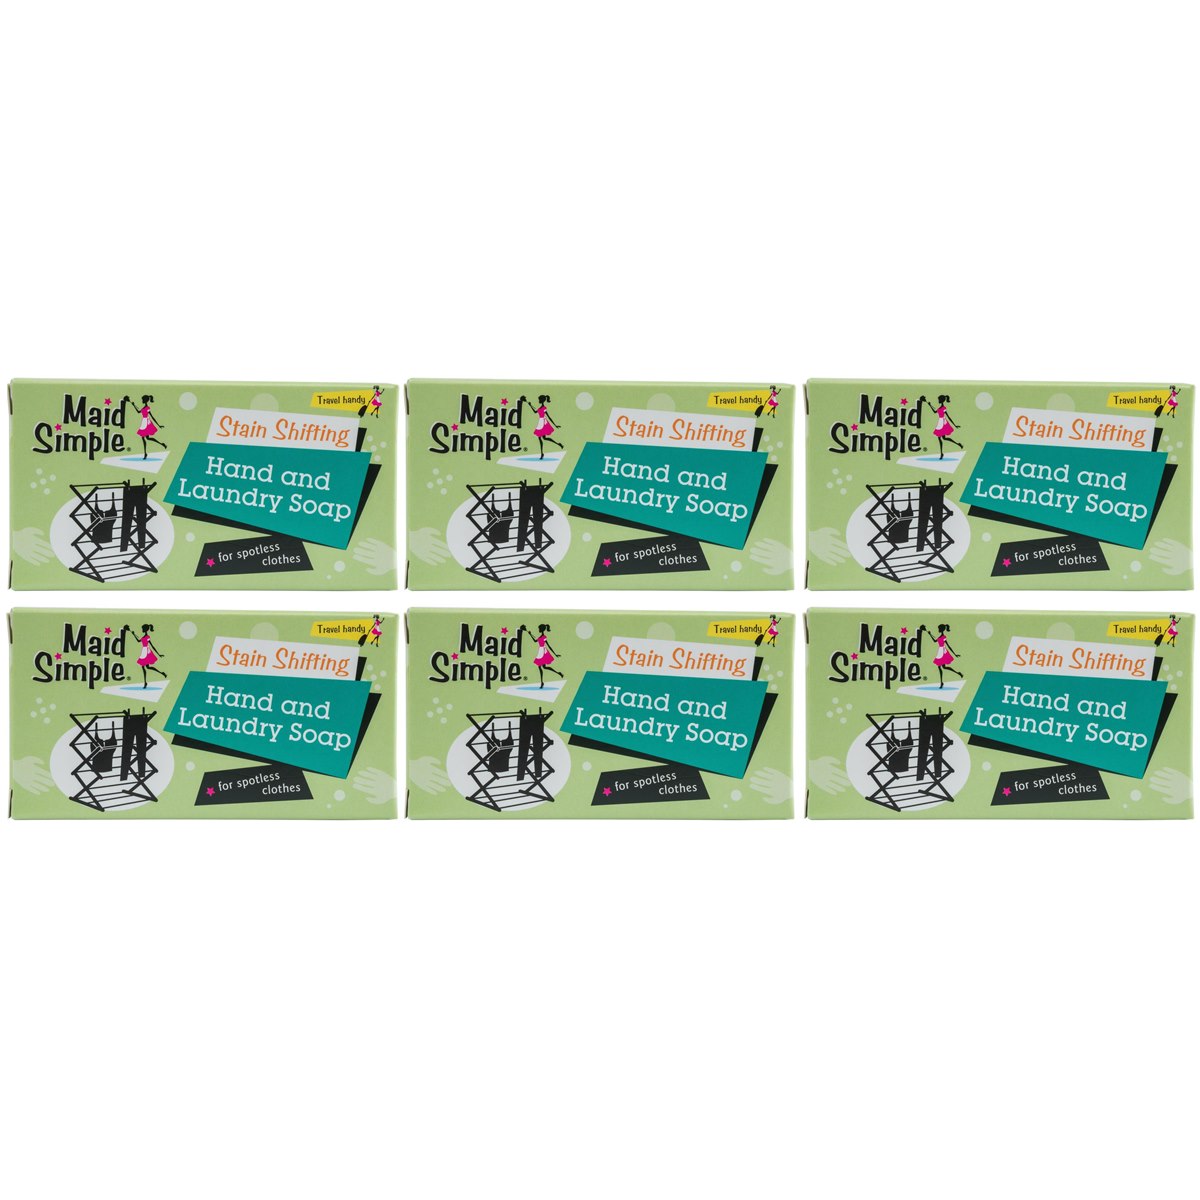 Case of 6 x Maid Simple Hand and Laundry Soap 170g